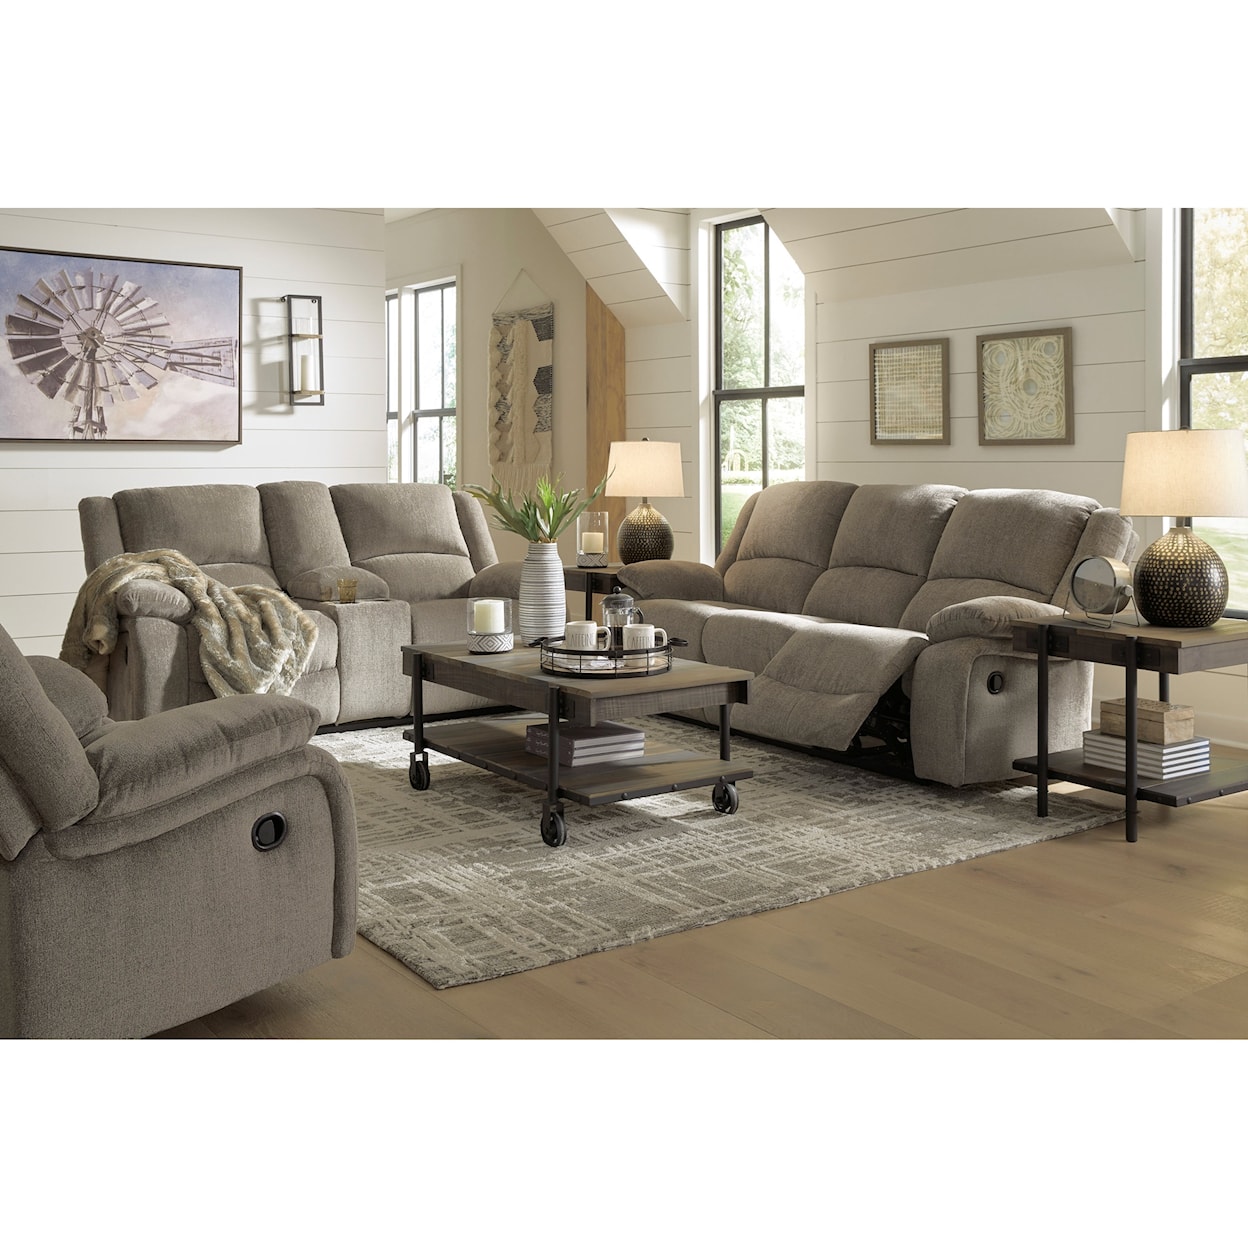 Signature Design by Ashley Draycoll Reclining Living Room Group